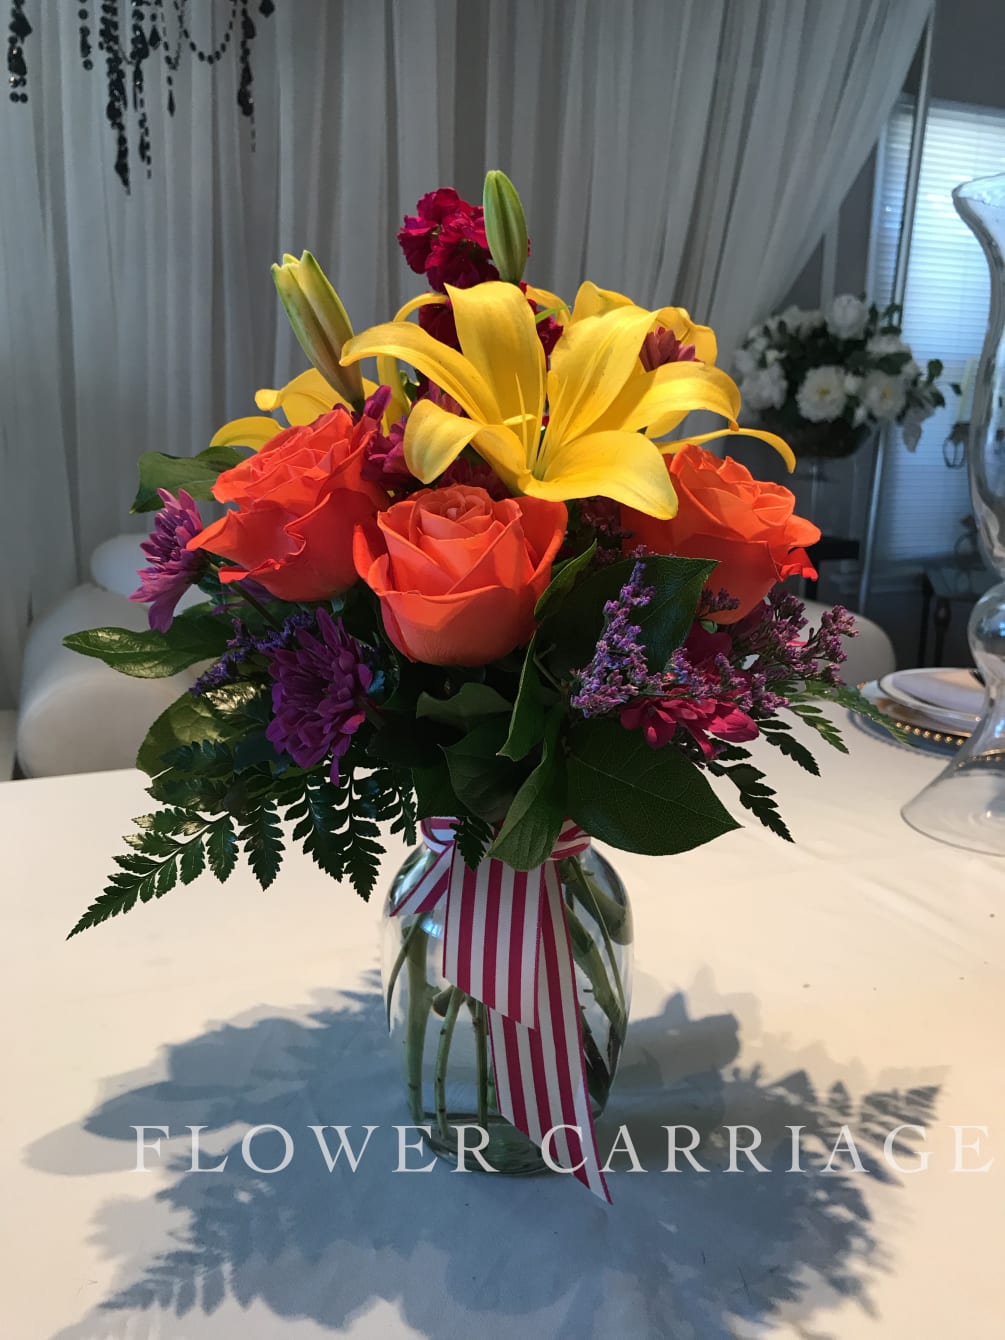 The brightest the biggest smile you will get, with this beautiful bouquet.
Lilies